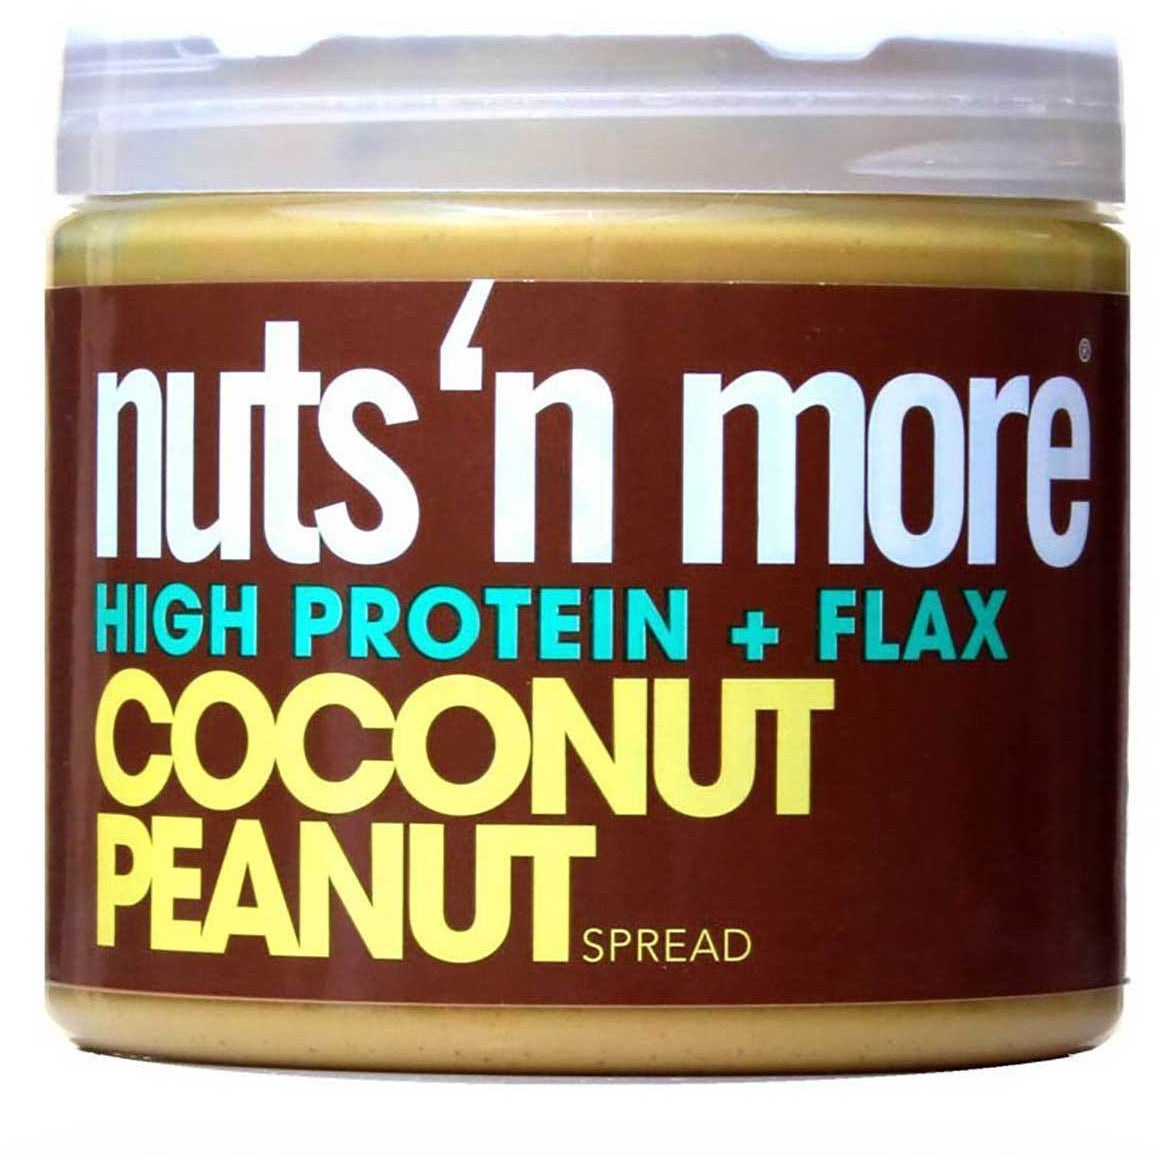 Nuts 'n More Protein Peanut Butter Protein Snacks Cookie Butter,Salted Caramel,Toffee Crunch,Birthday Cake,Chocolate Maple Pretzel,Peanut Butter,Dark Chocolate BEST BY April 13 2022,Cookie Dough,White Chocolate Pretzel,Apple Crisp,Spiced Pumpkin Pie *LIMITED EDITION*,Banana Nut BEST BY May 4 2022,Cookies 'N Cream,Gingerbread,Peañut Colada,Wild Honey Nuts 'n More